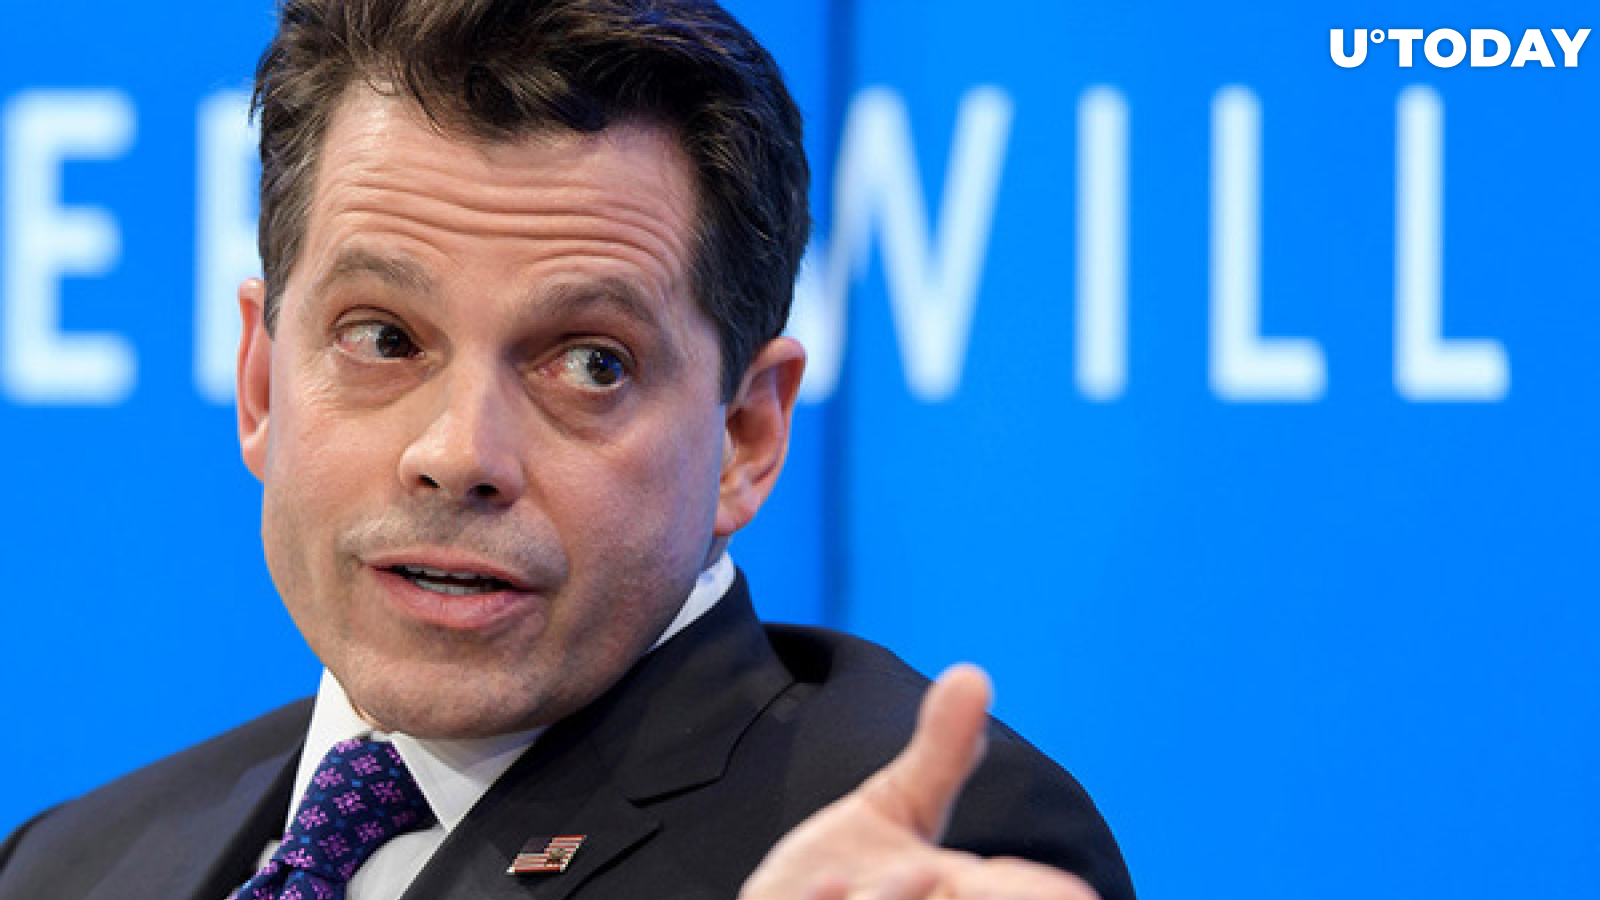 Anthony Scaramucci Compares Bitcoin to Early Amazon, Talks About 64x Returns 